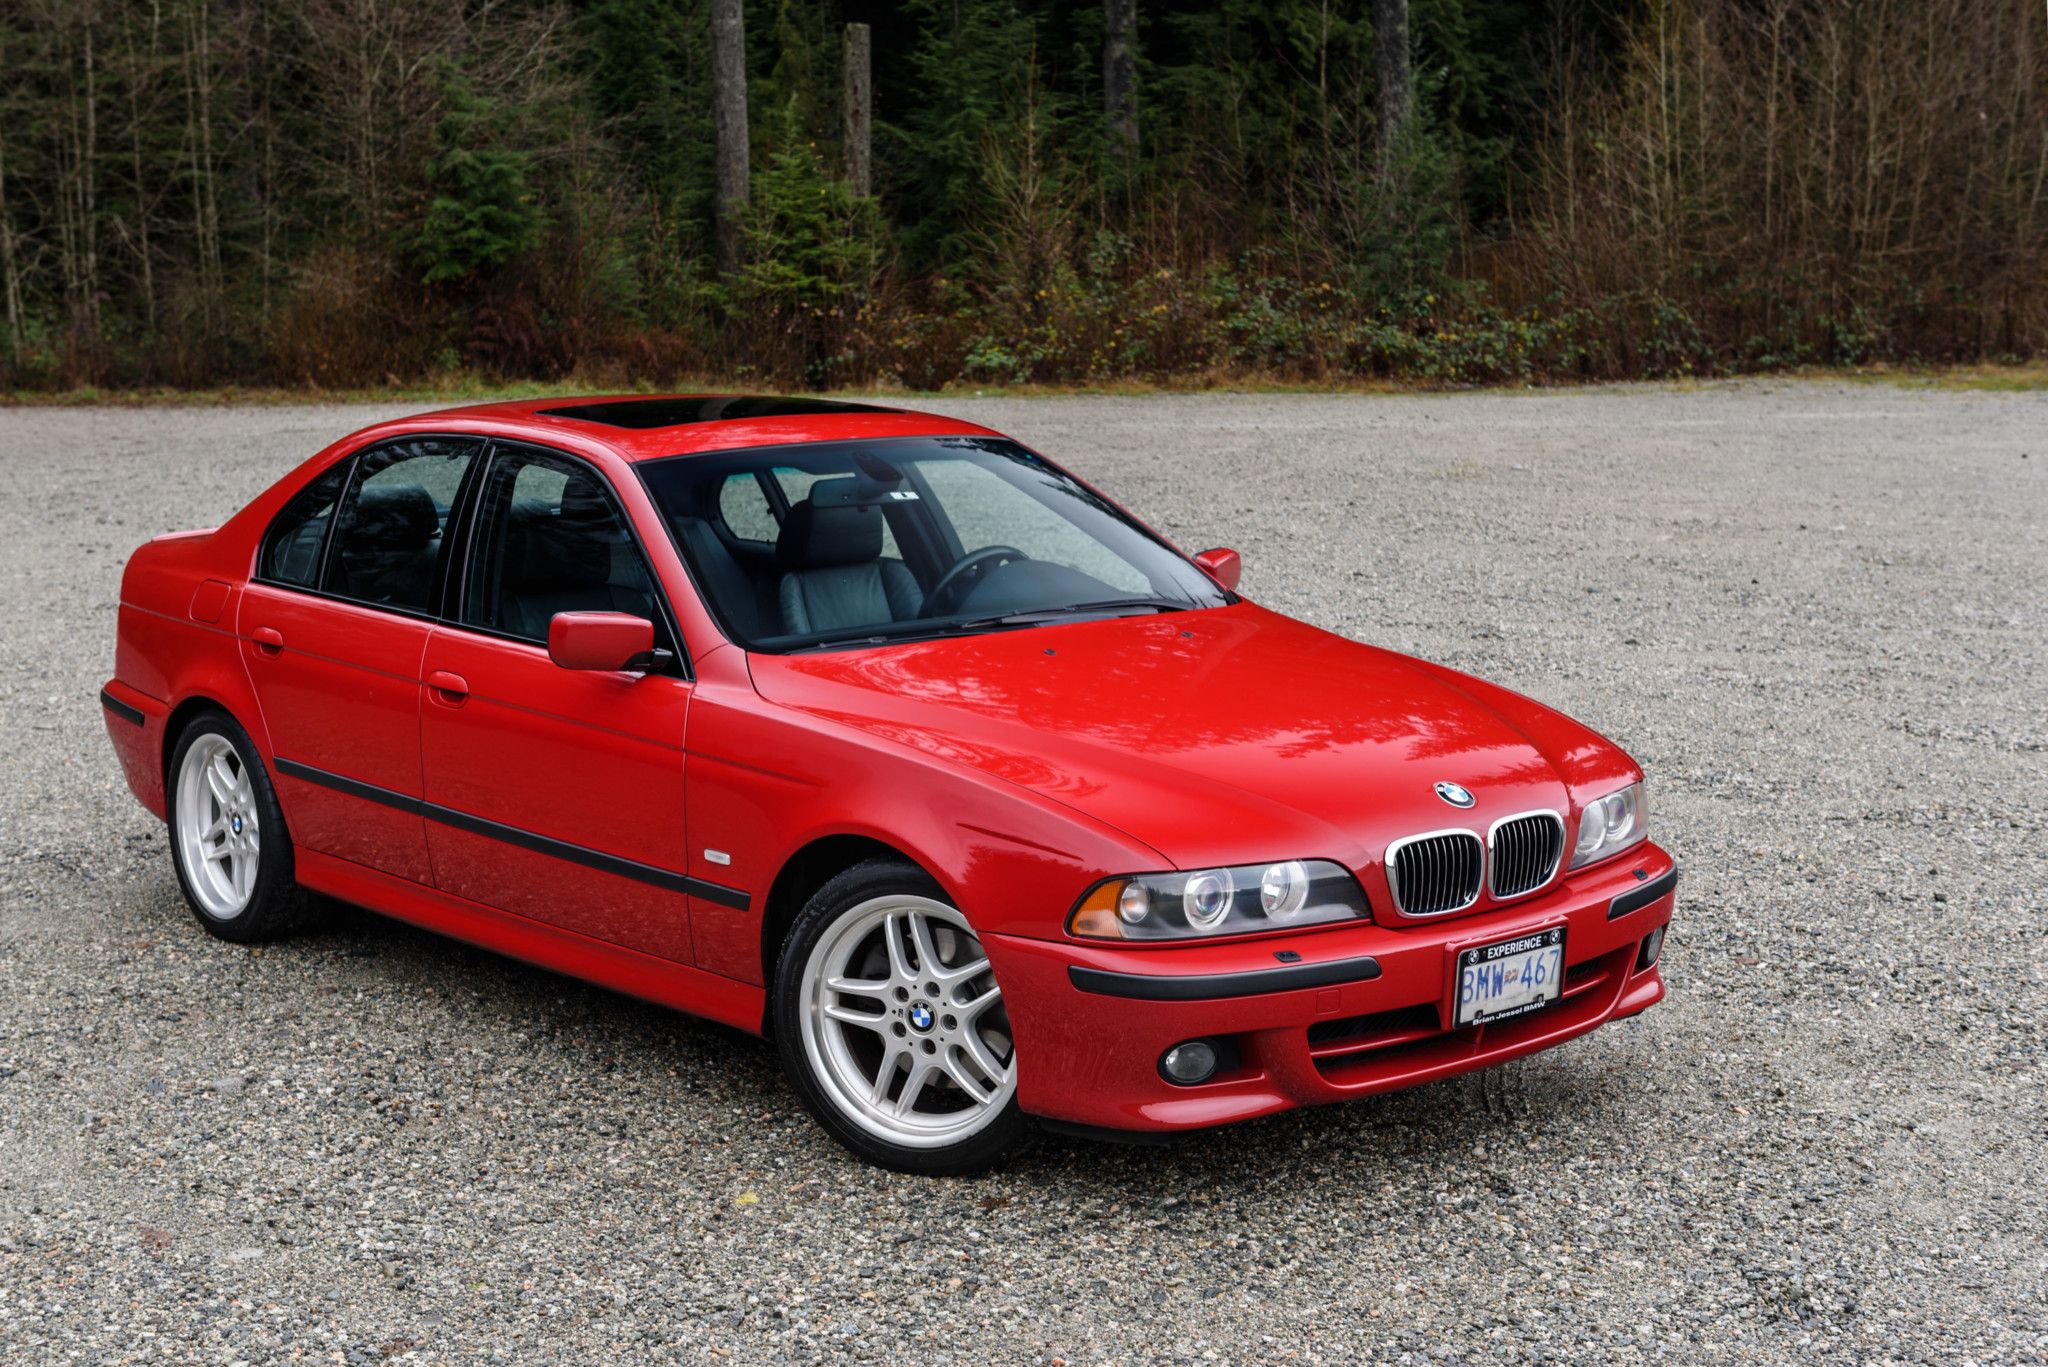 Bright Red 2003 BMW 540i sand and forest